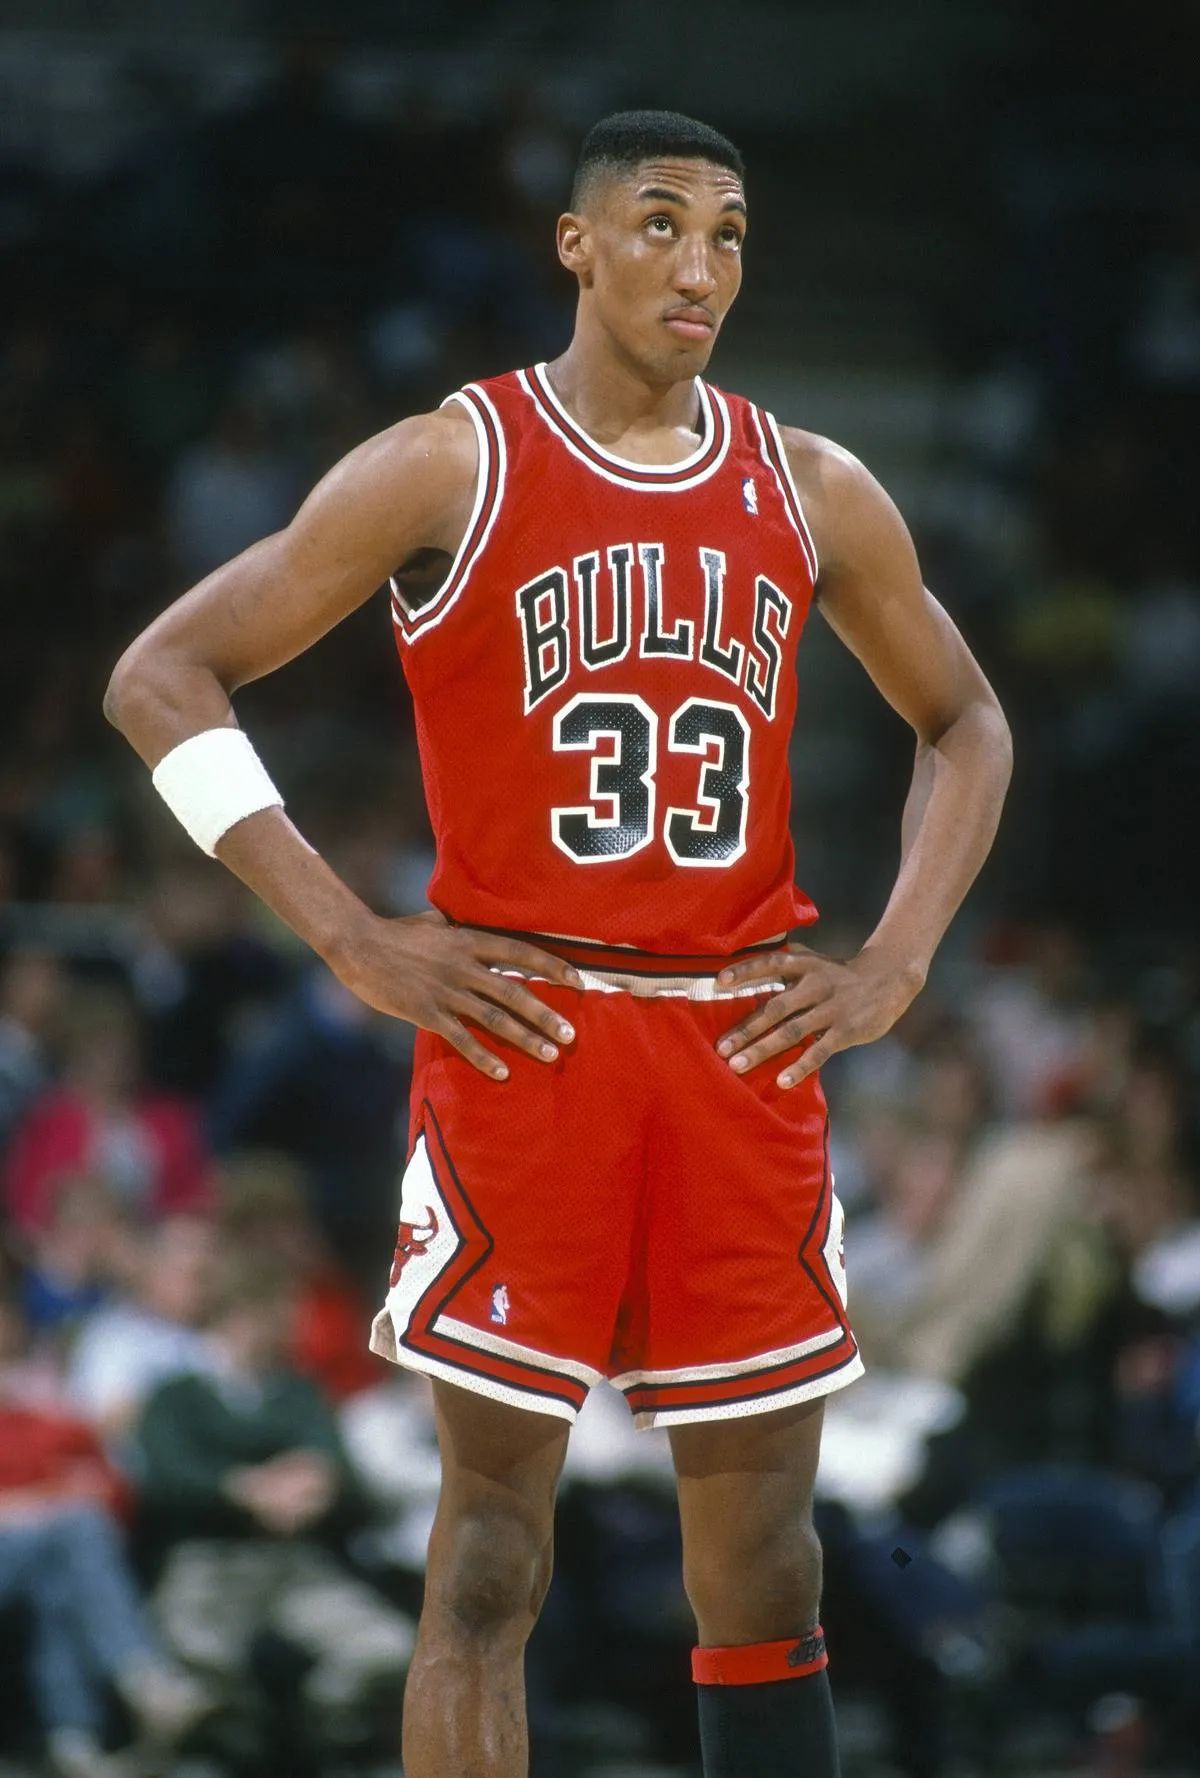 Scottie Pippen #33 of the Chicago Bulls looks on against the Milwaukee Bucks during an NBA basketball game circa 1990 at the Bradley Center in Milwaukee, Wisconsin